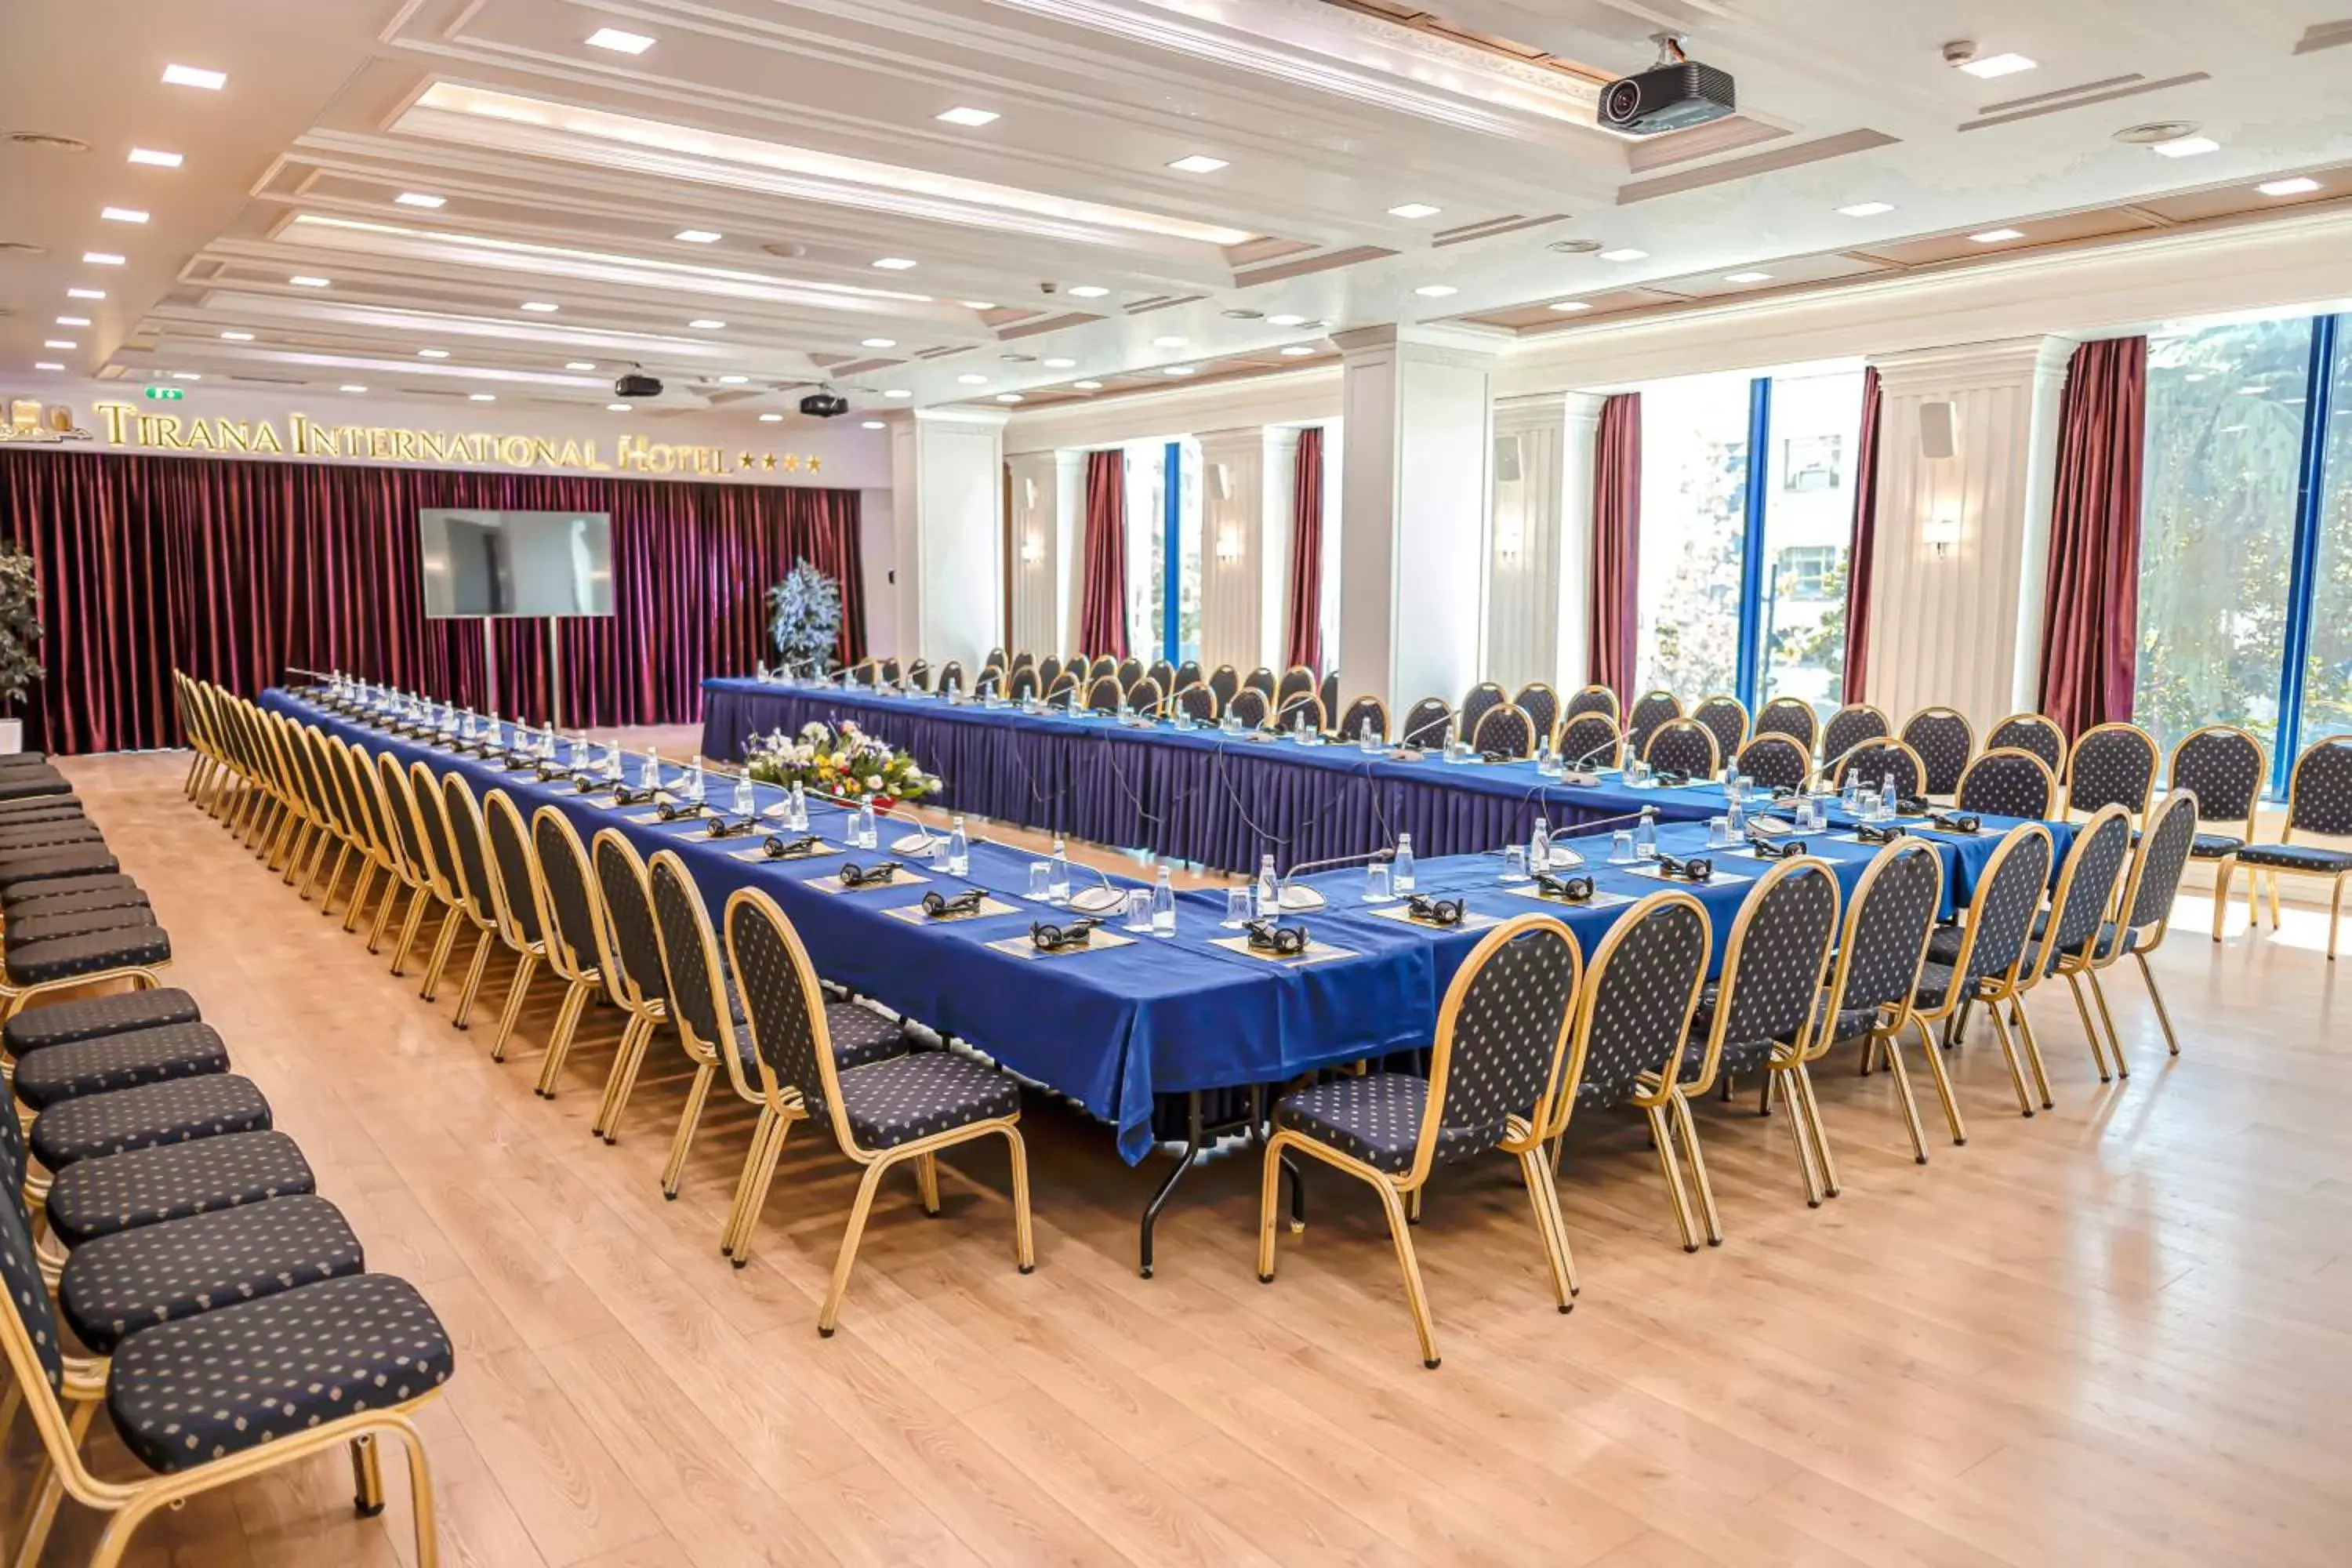 Meeting/conference room in Tirana International Hotel & Conference Center